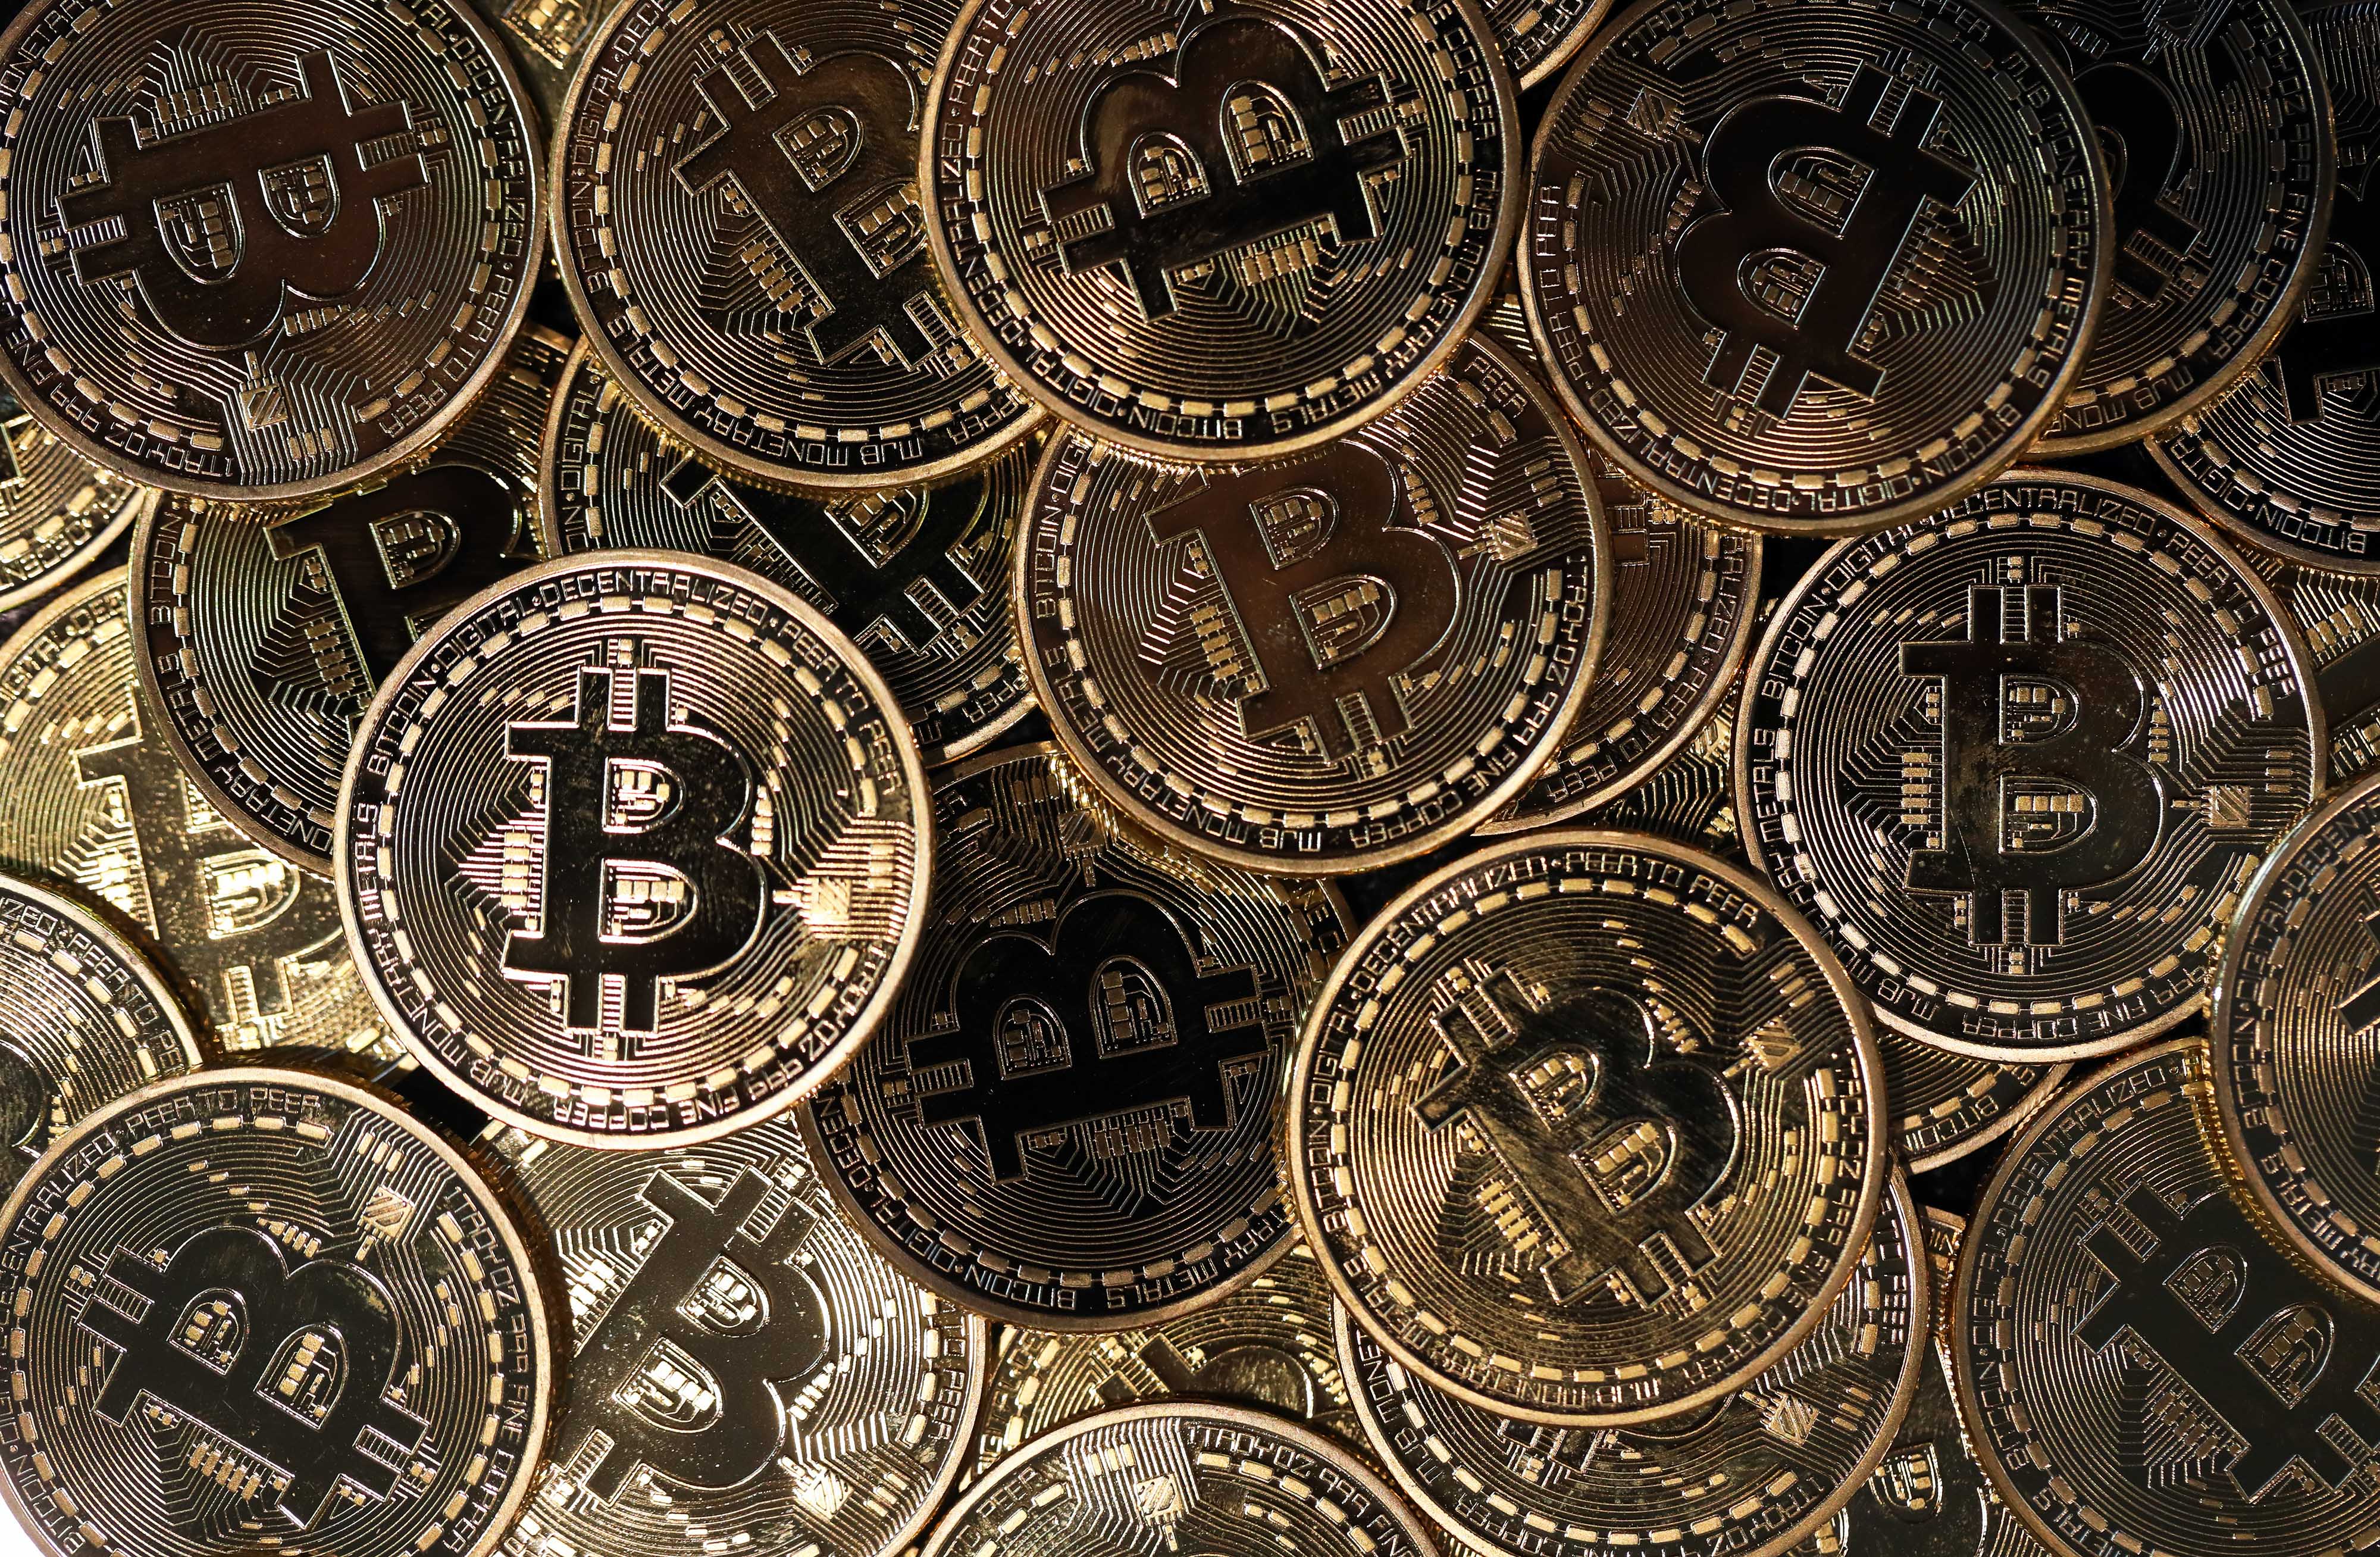 A collection of bitcoin tokens. (Bloomberg&mdash;Bloomberg via Getty Images)